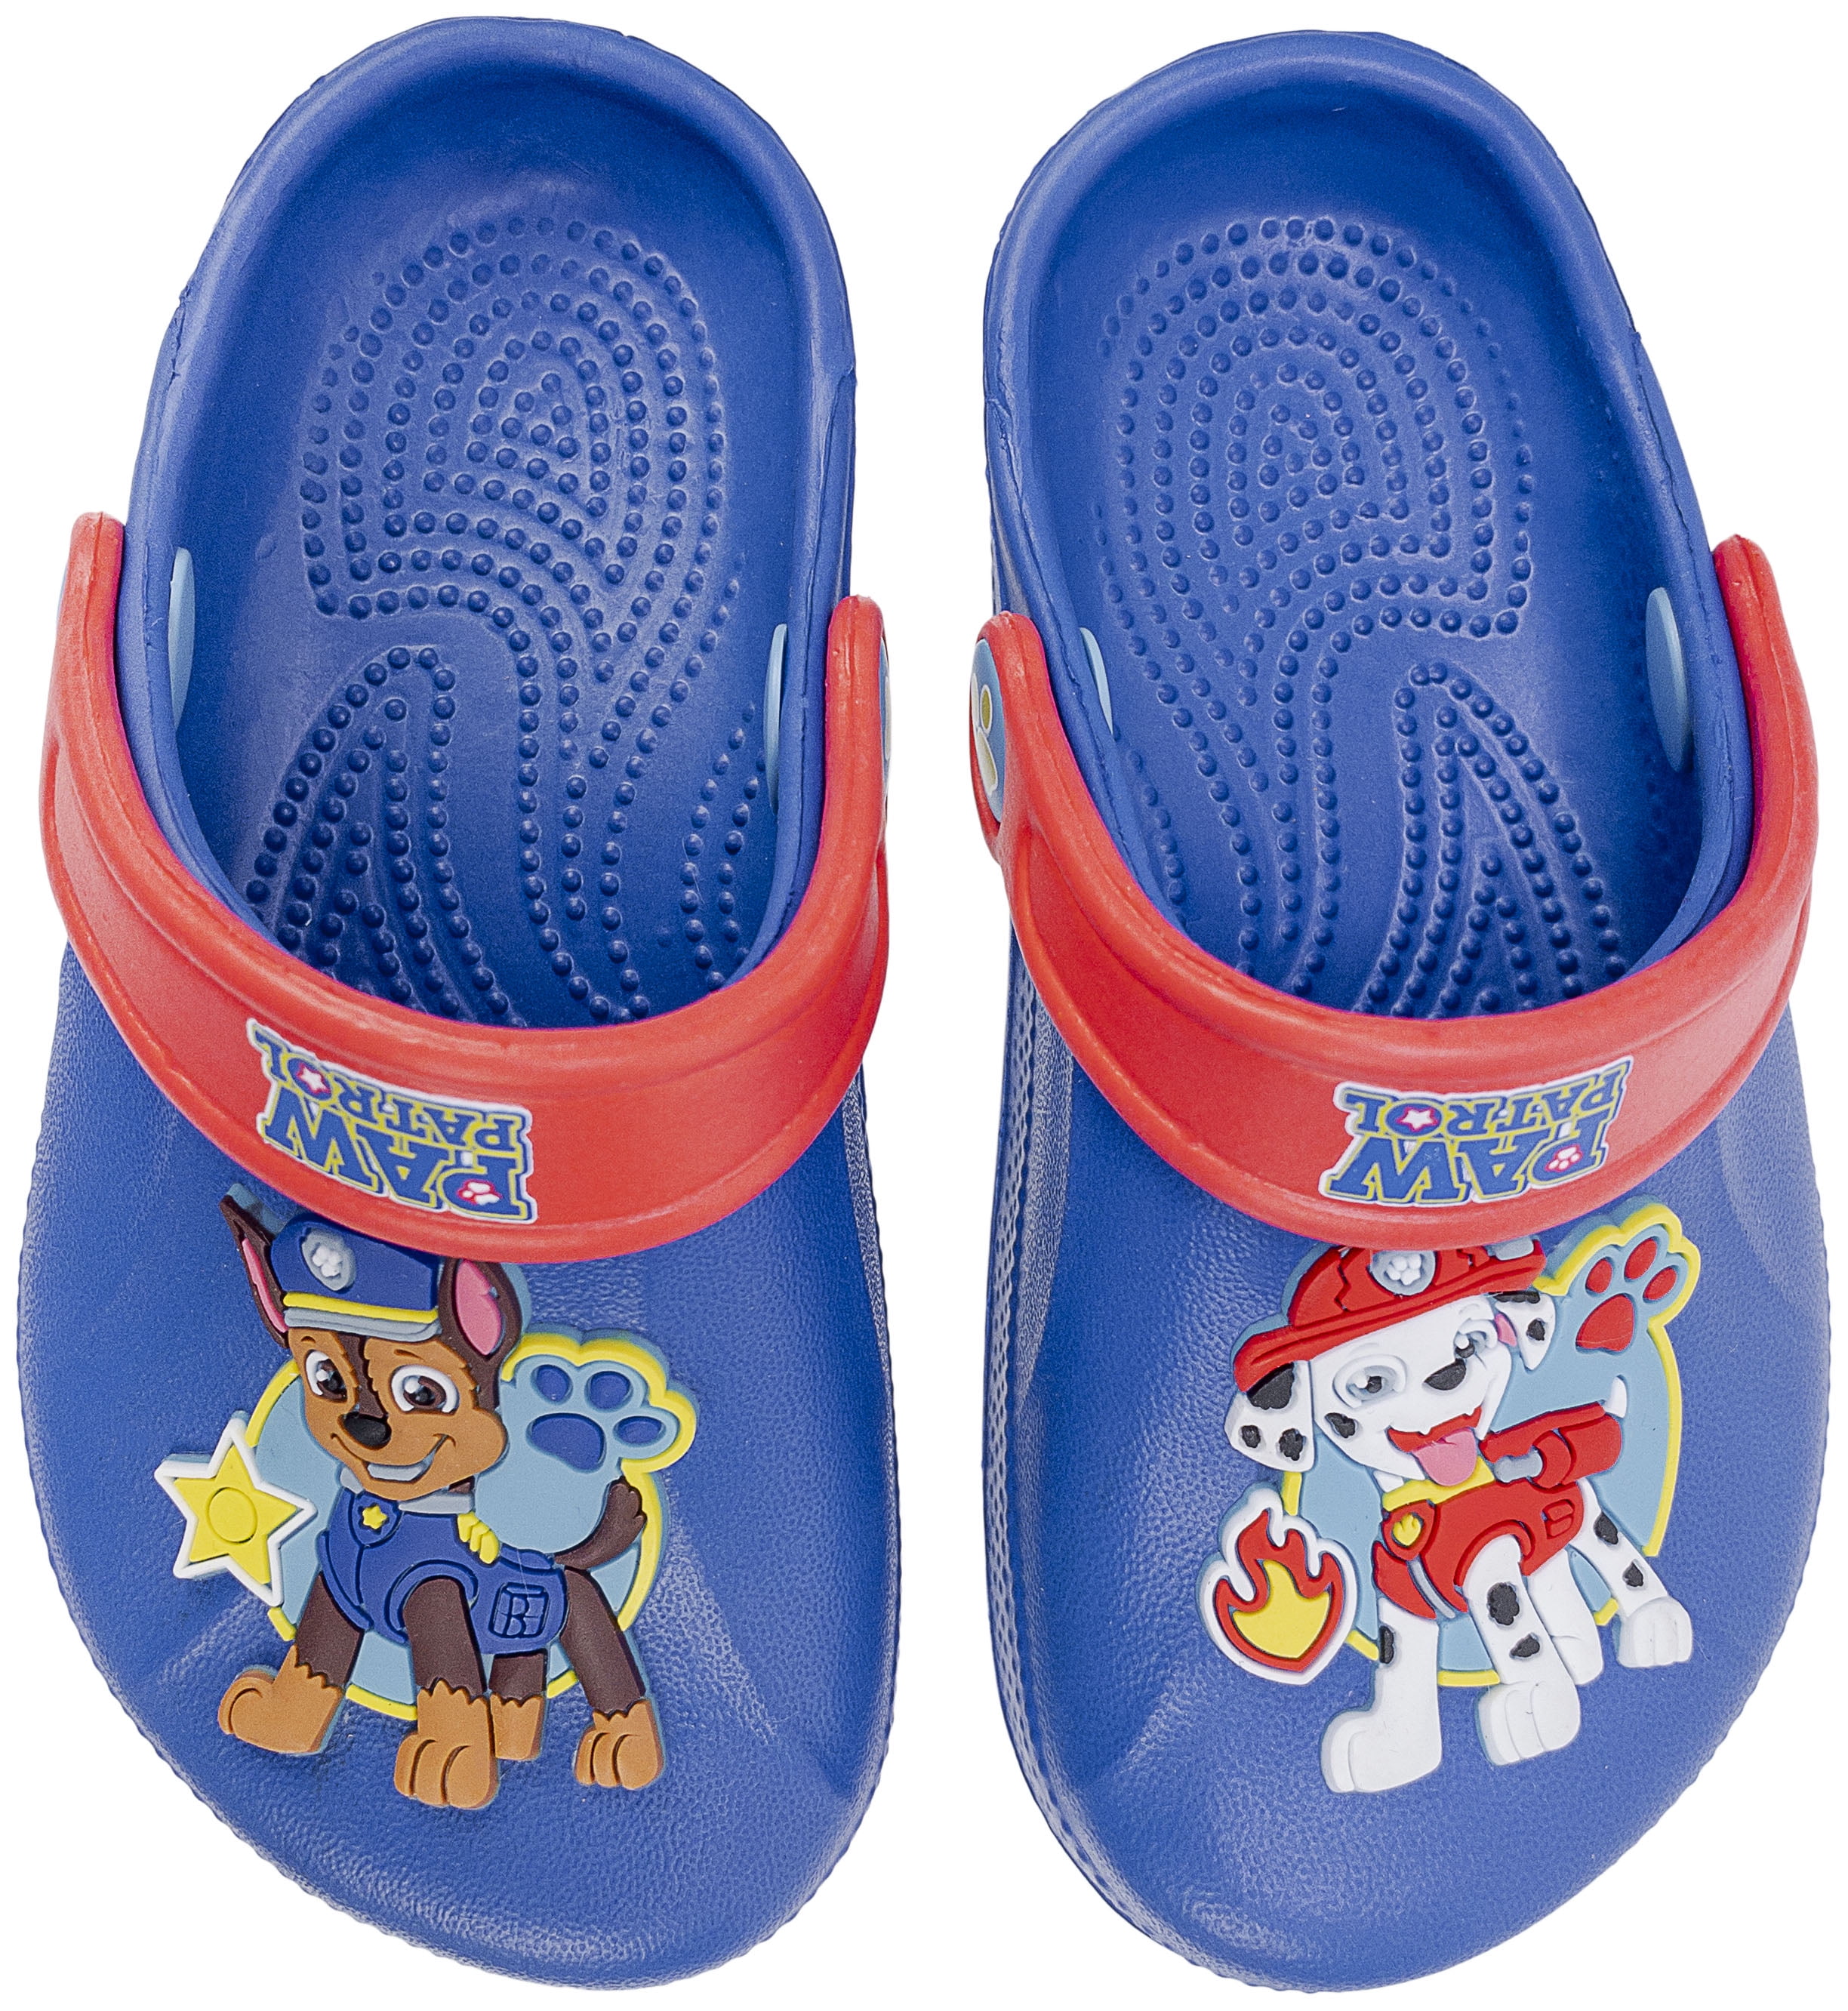 Chase Marshall Paw Patrol Boy's Slip-on Clog Shoes with Backstrap Blue size12 